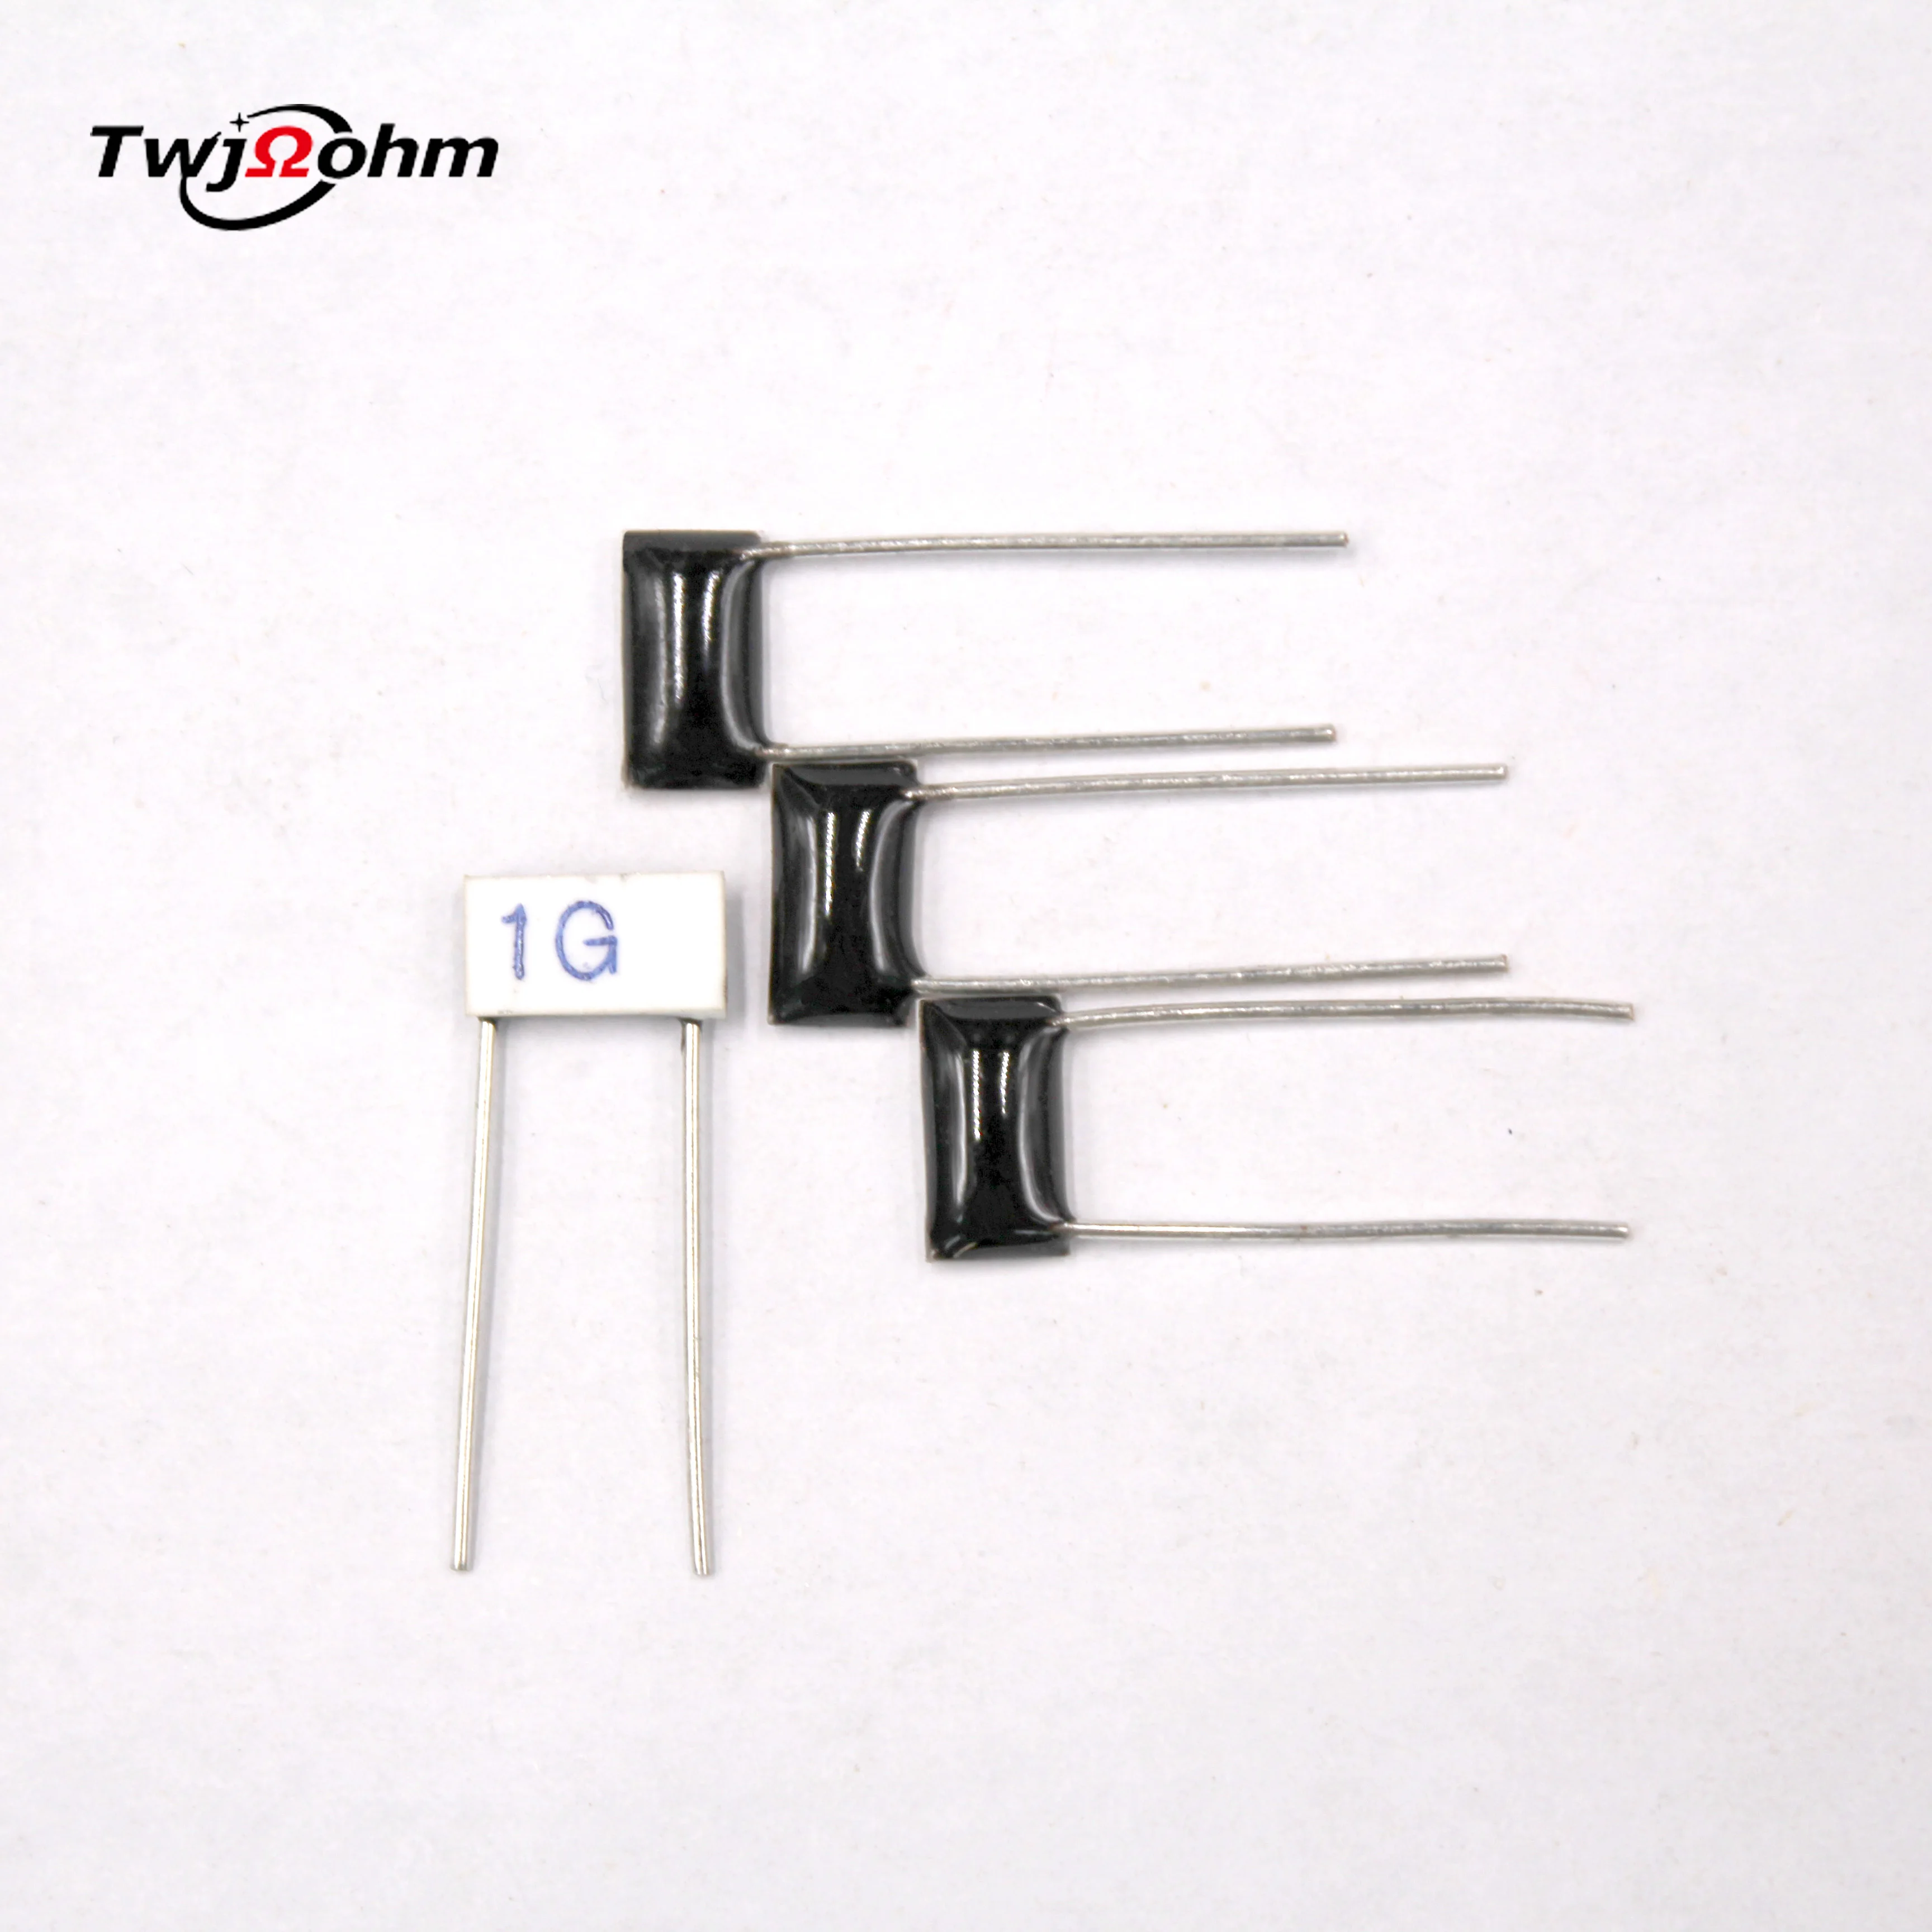 10Pcs HVR82MZ1005 thick film chip resistor 100M50M200M30M500M1G2G5G Ohmic ceramic chip microphone specific high-voltage resis amplified low to high impedance ptt adapter for peltor comtac iii and msa sordin headset dynamic microphone